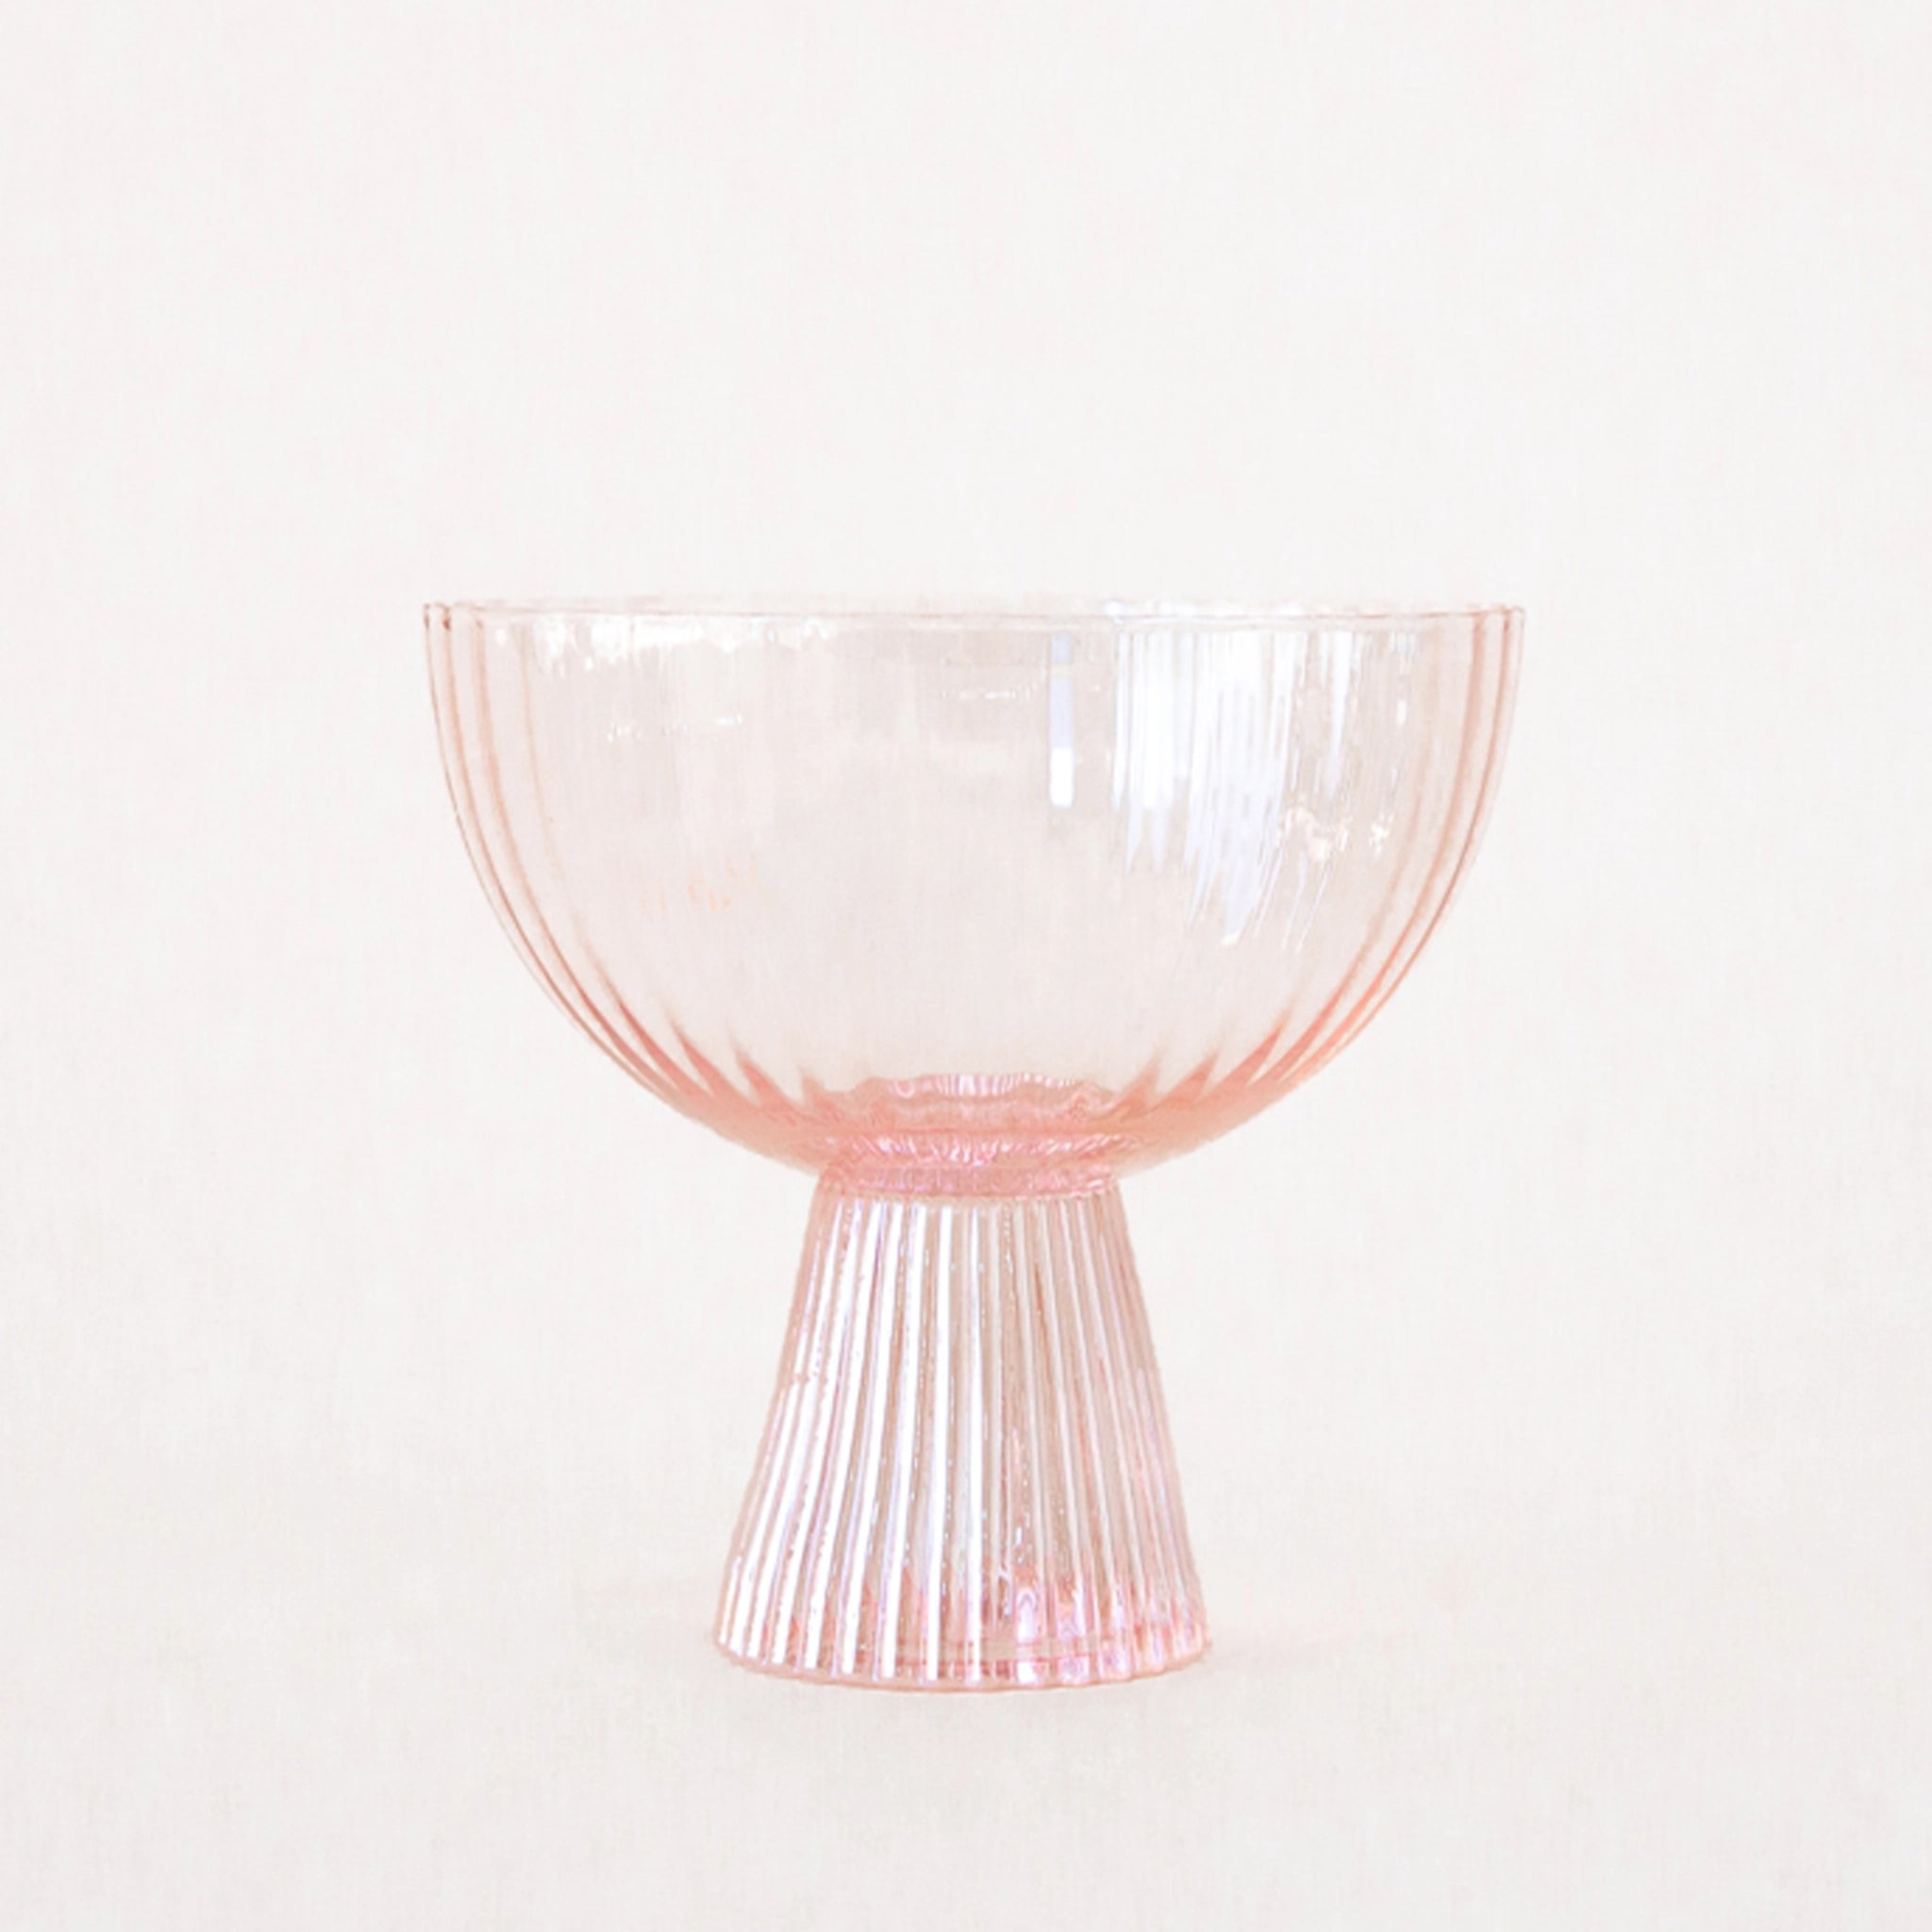 On a white background is a ribbed light pink coupe glass. 